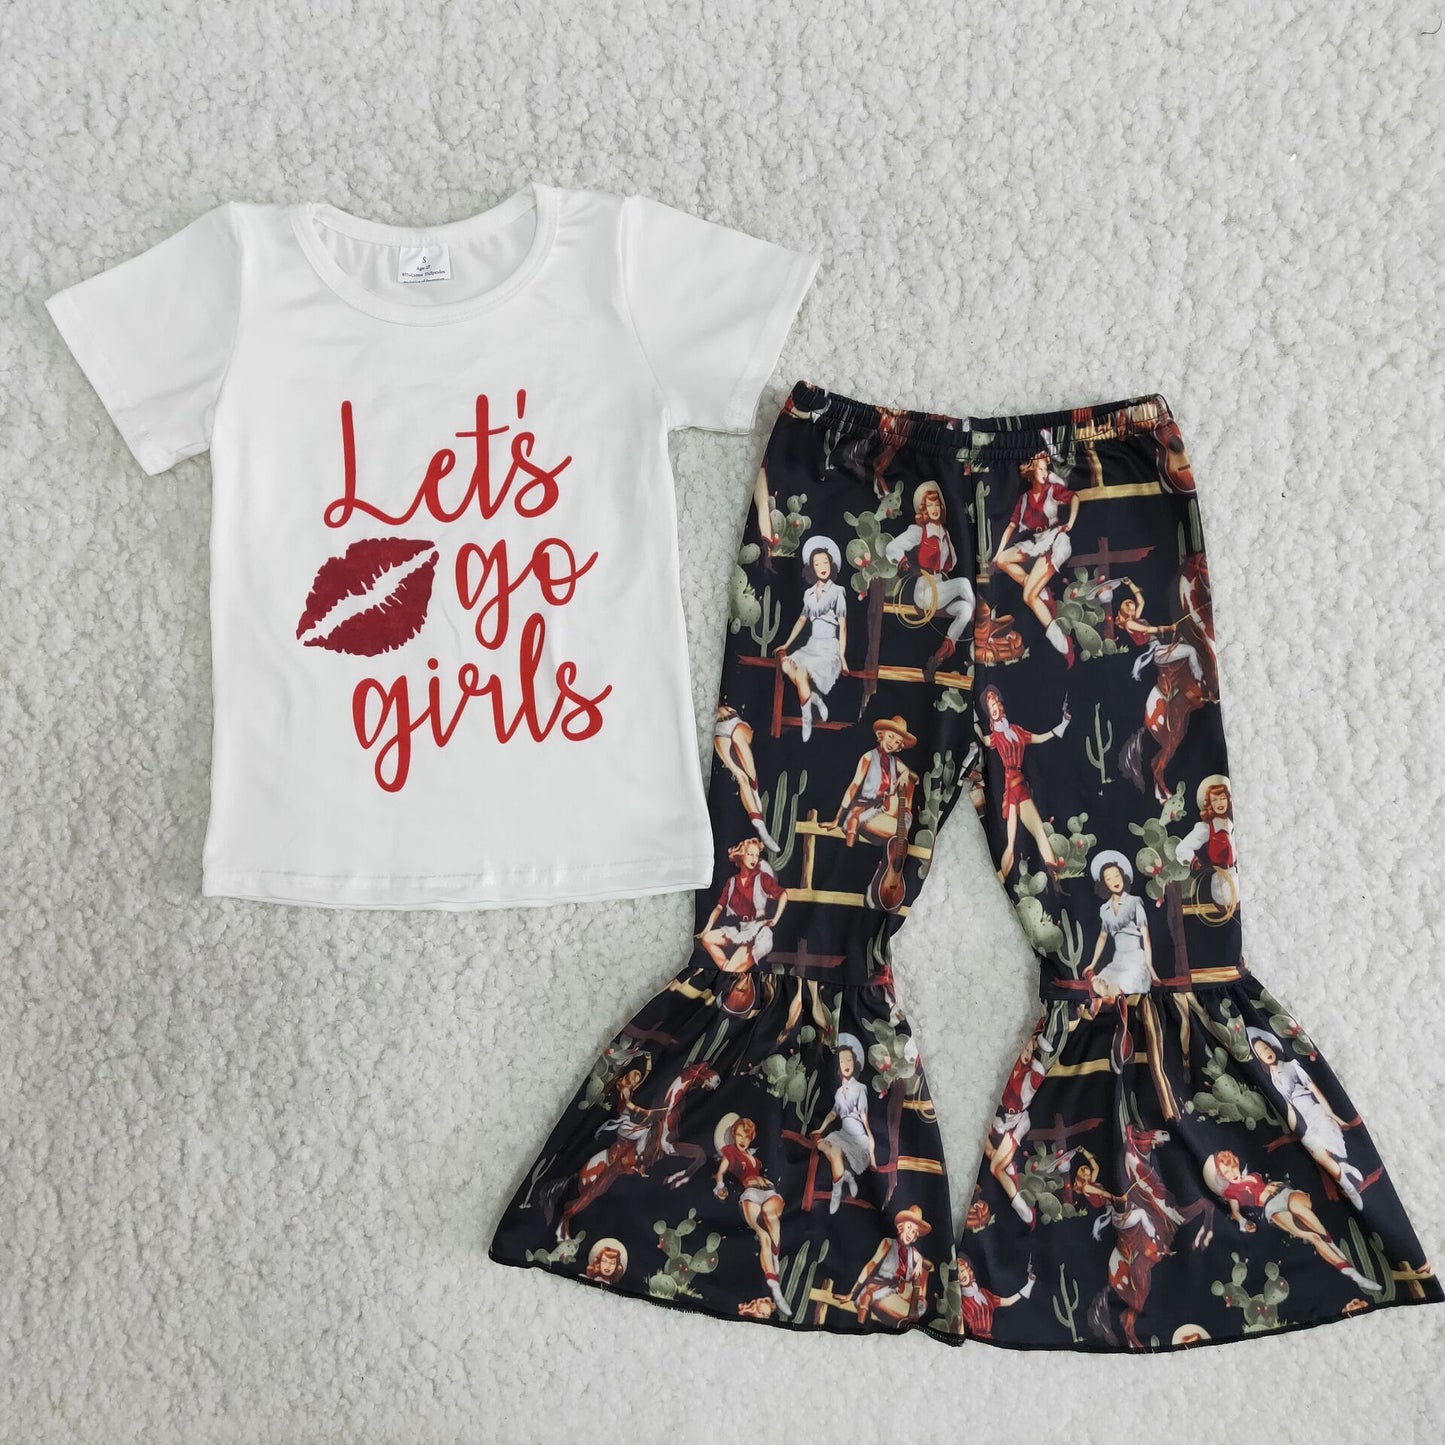 Lets do girls summer outfit,B7-15